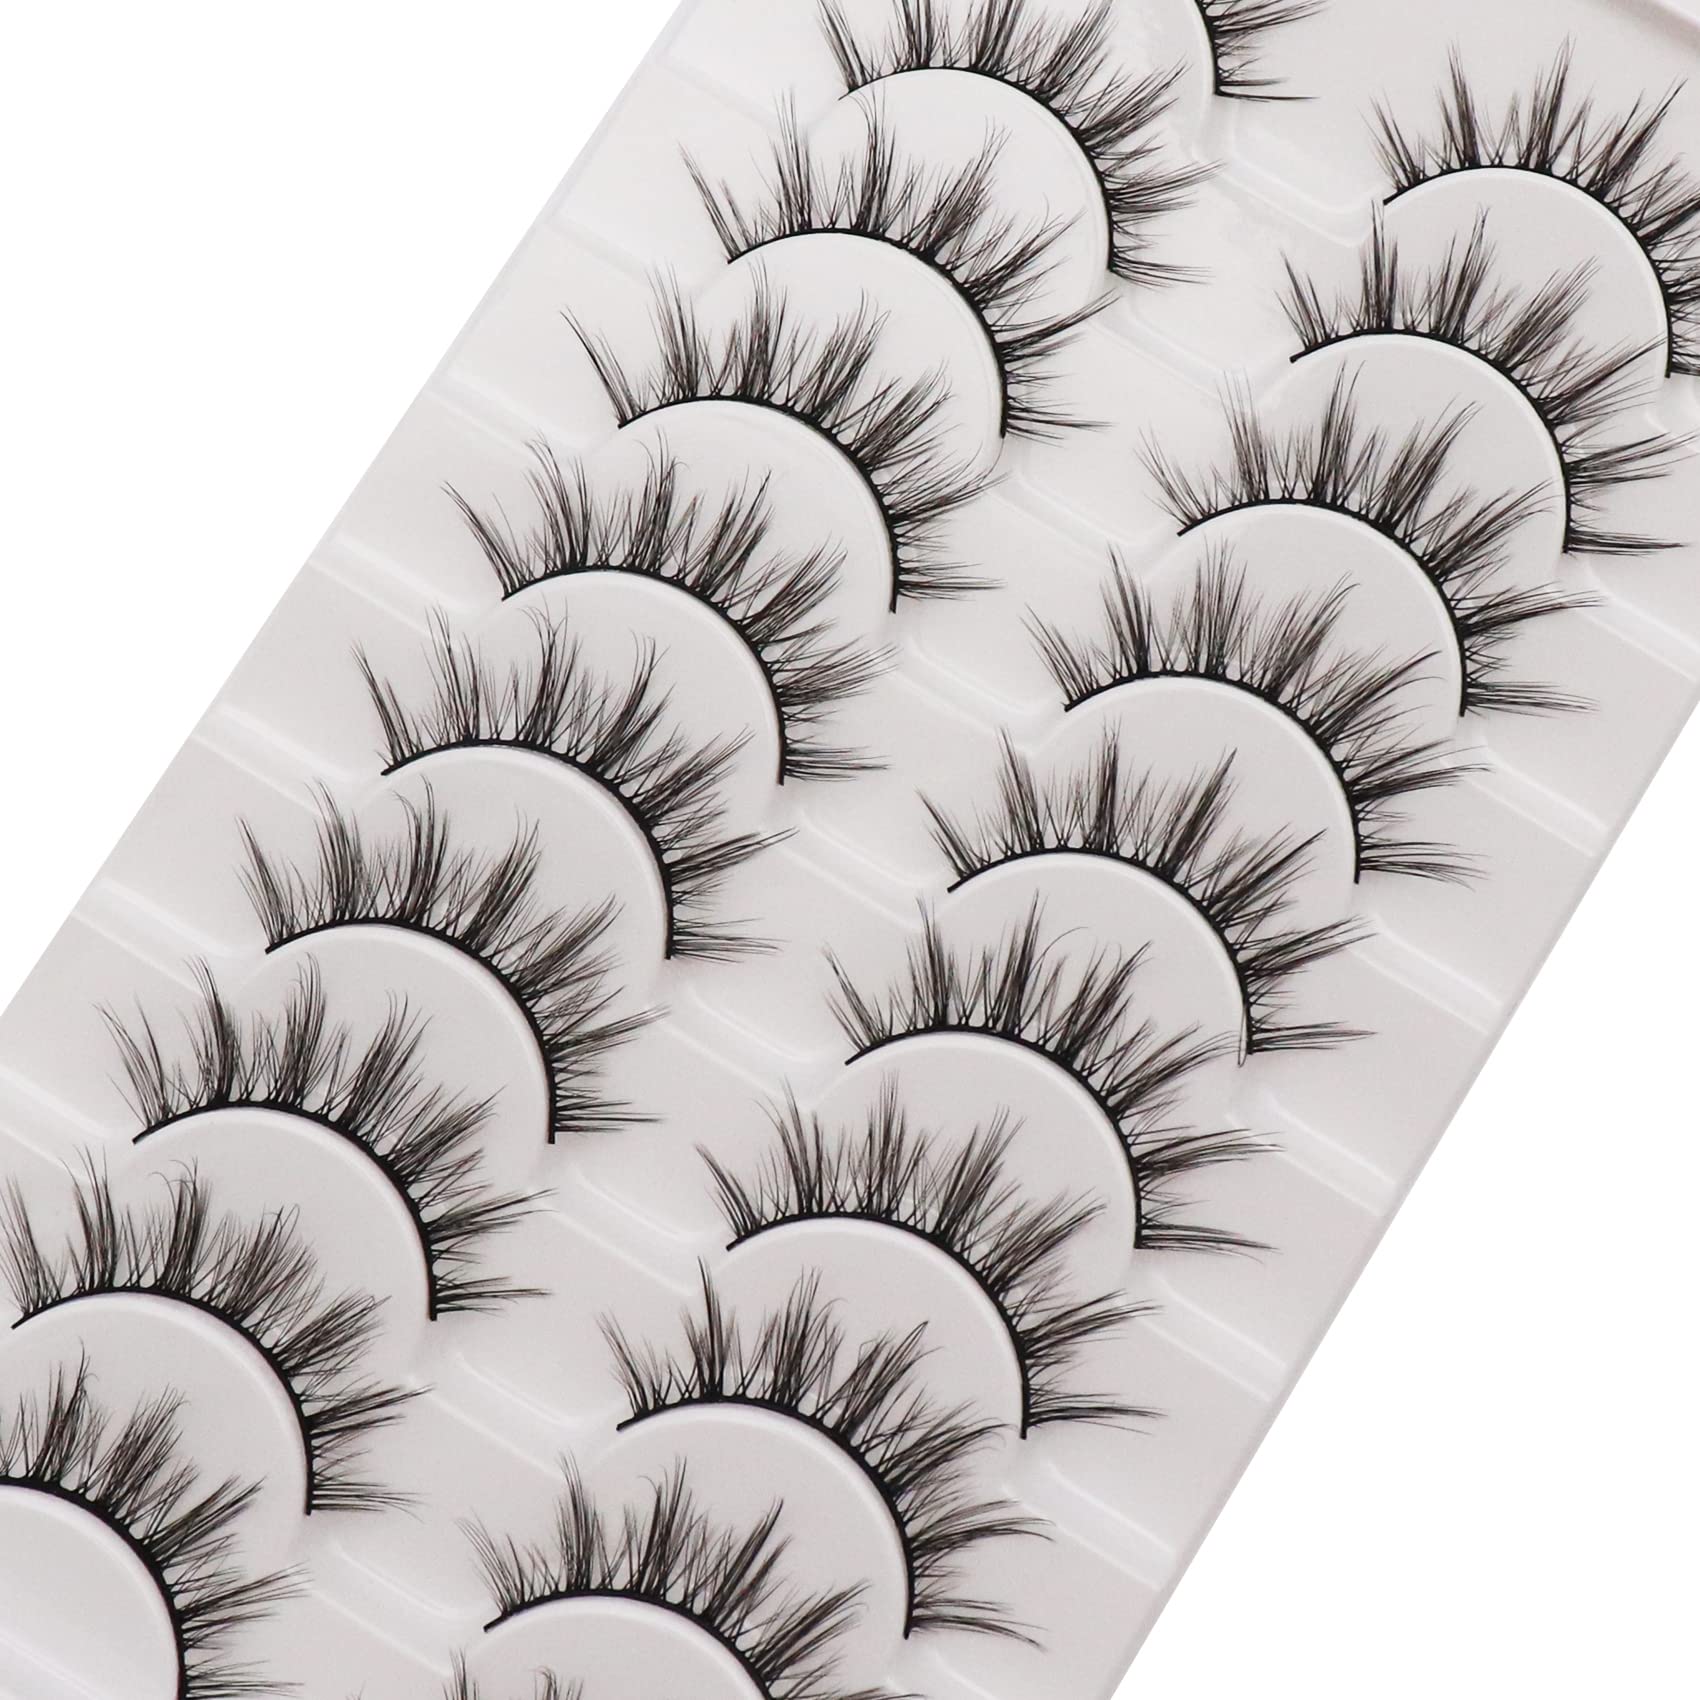 Manga Lashes, Anime Lashes Natural Look Wispy Soft Lashes Look Like Clusters 10 Pairs Pack